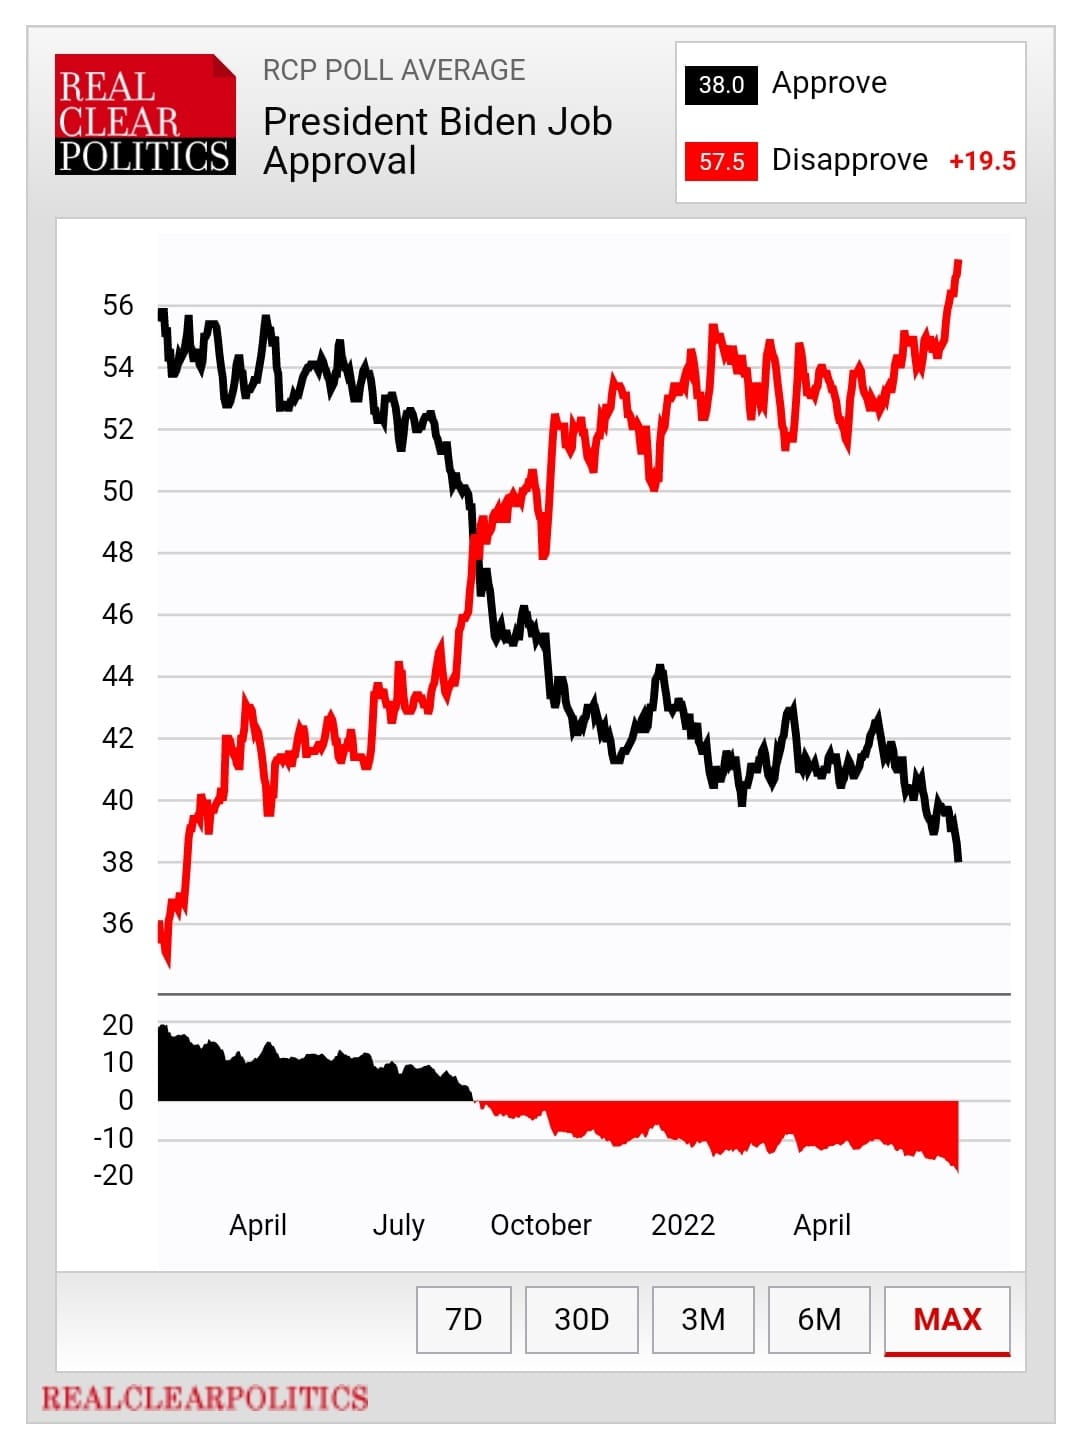 Biden RCP average approval down to 38%, disapproval up...